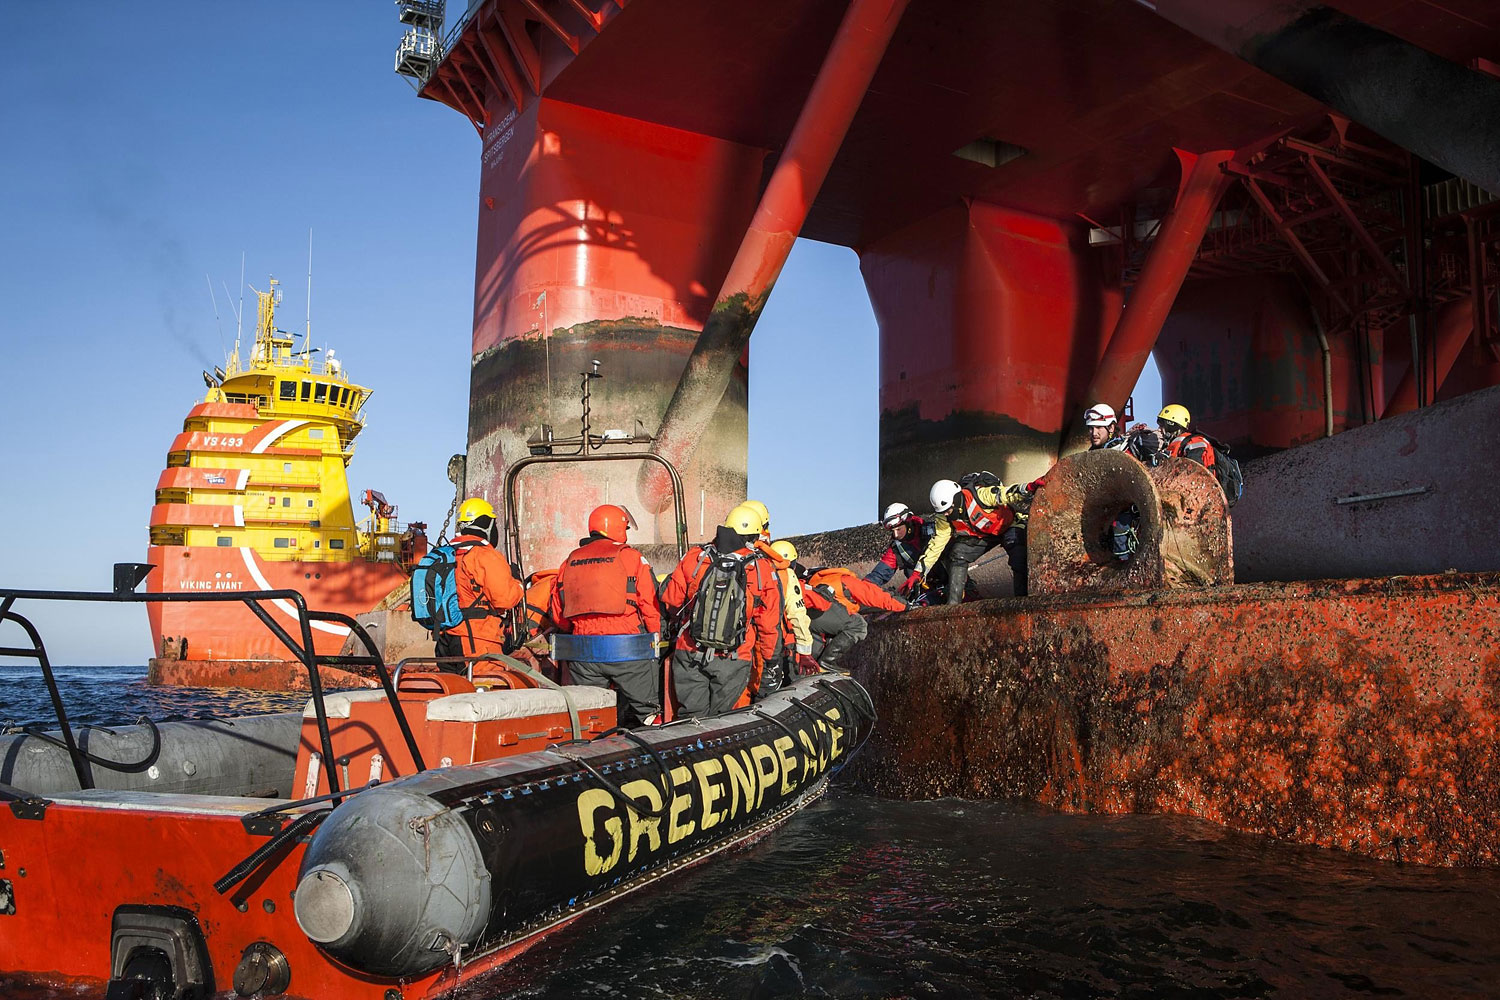 Greenpeace International activists from eight countries scale and occupy Statoil contracted oil rig Transocean Spitsbergen on May 27, 2014 to protest the company's plans to drill the northernmost well in the Norwegian Arctic at the Apollo Prospect of the Barents Sea, close to the Bear Island nature reserve. (Will Rose—Greenpeace/AFP/Getty Images)